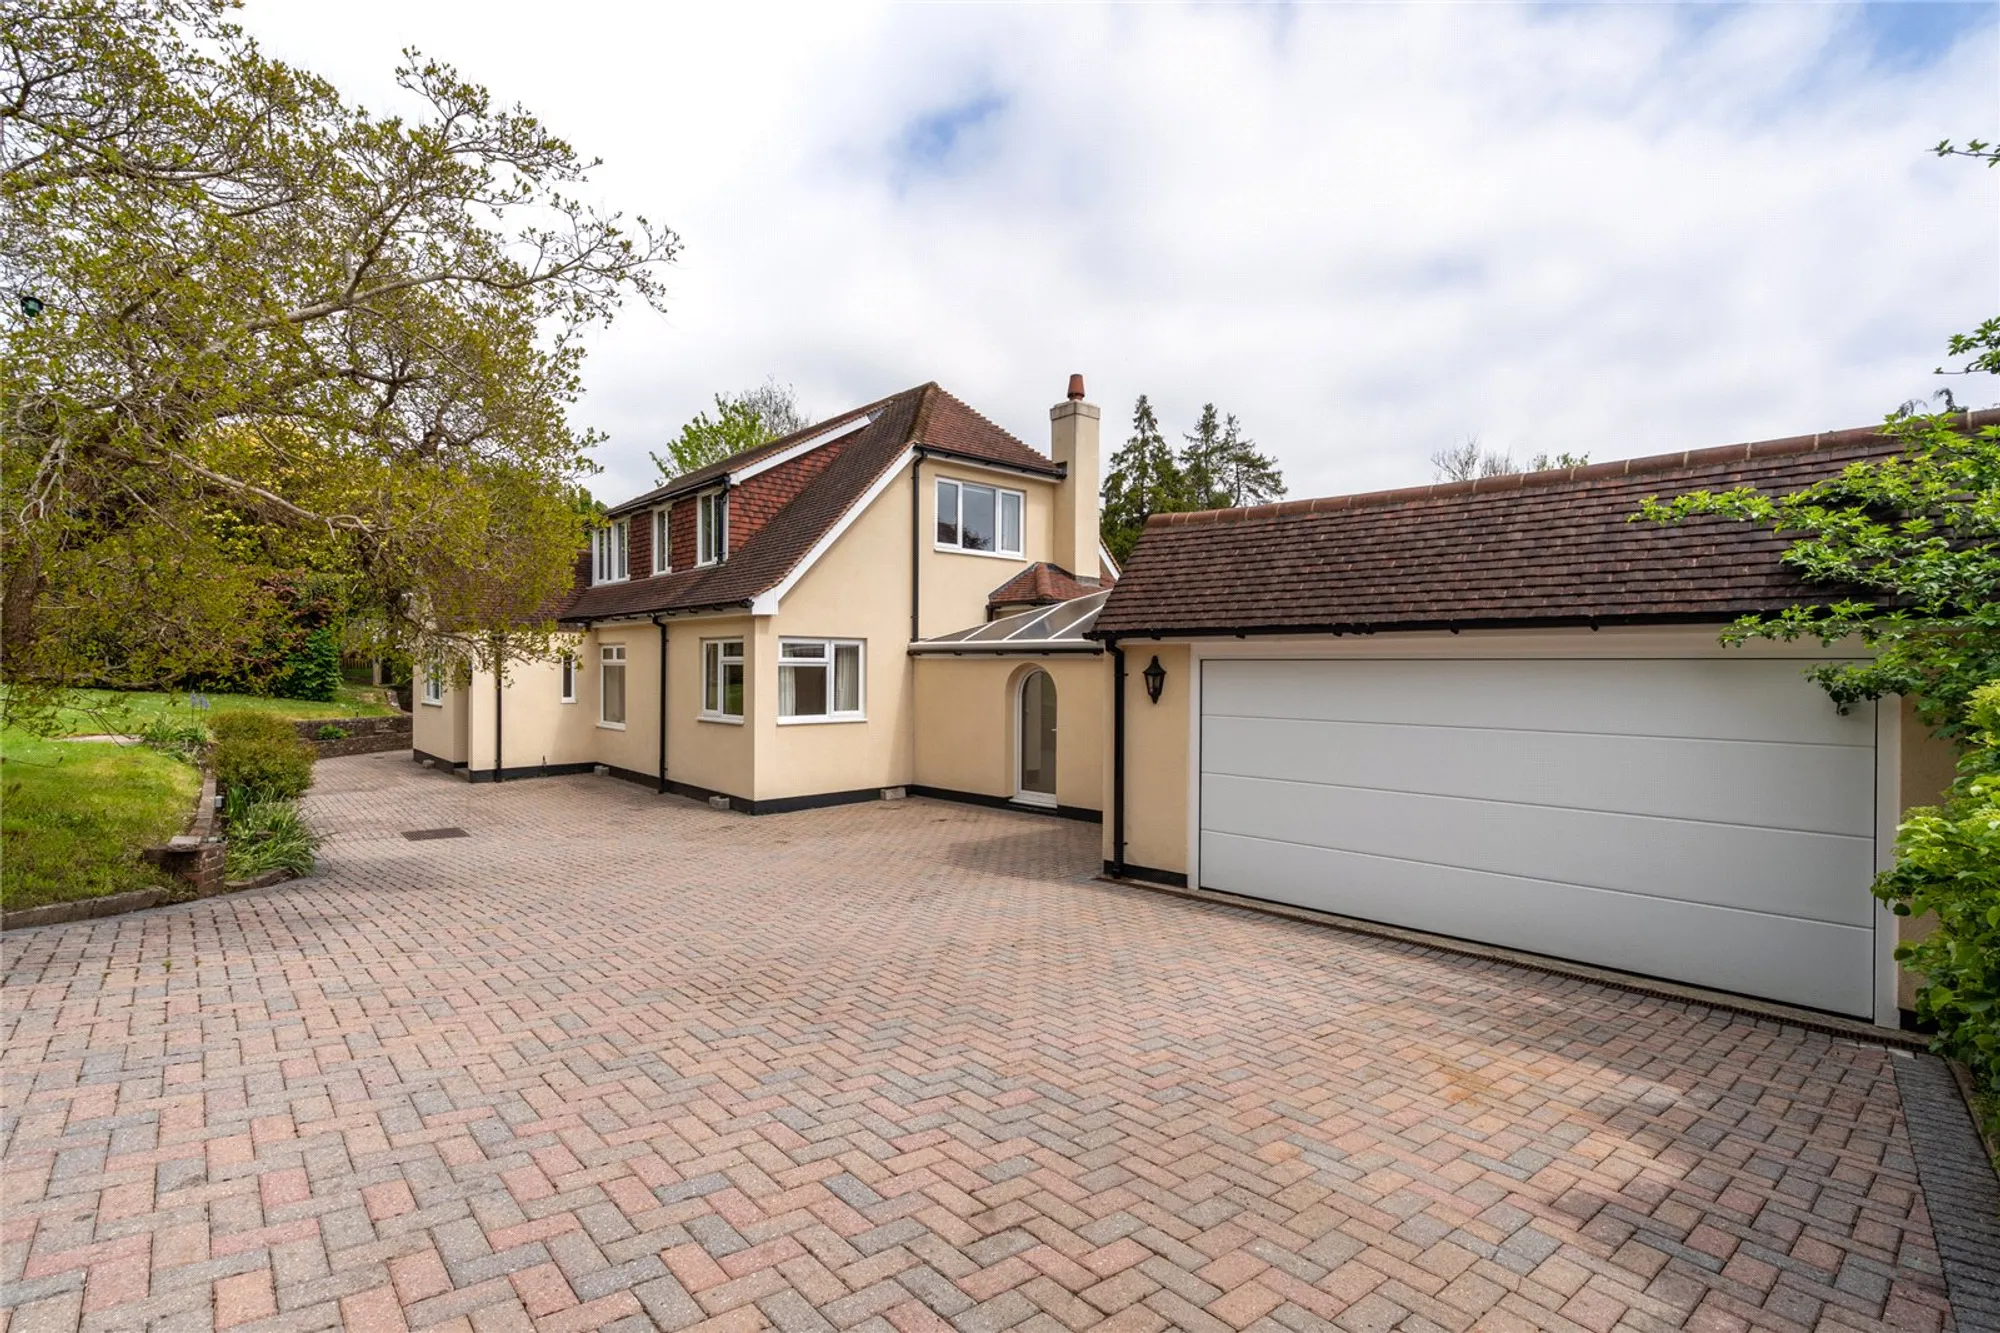 5 bed detached house for sale in Butlers Dene Road, Caterham  - Property Image 39